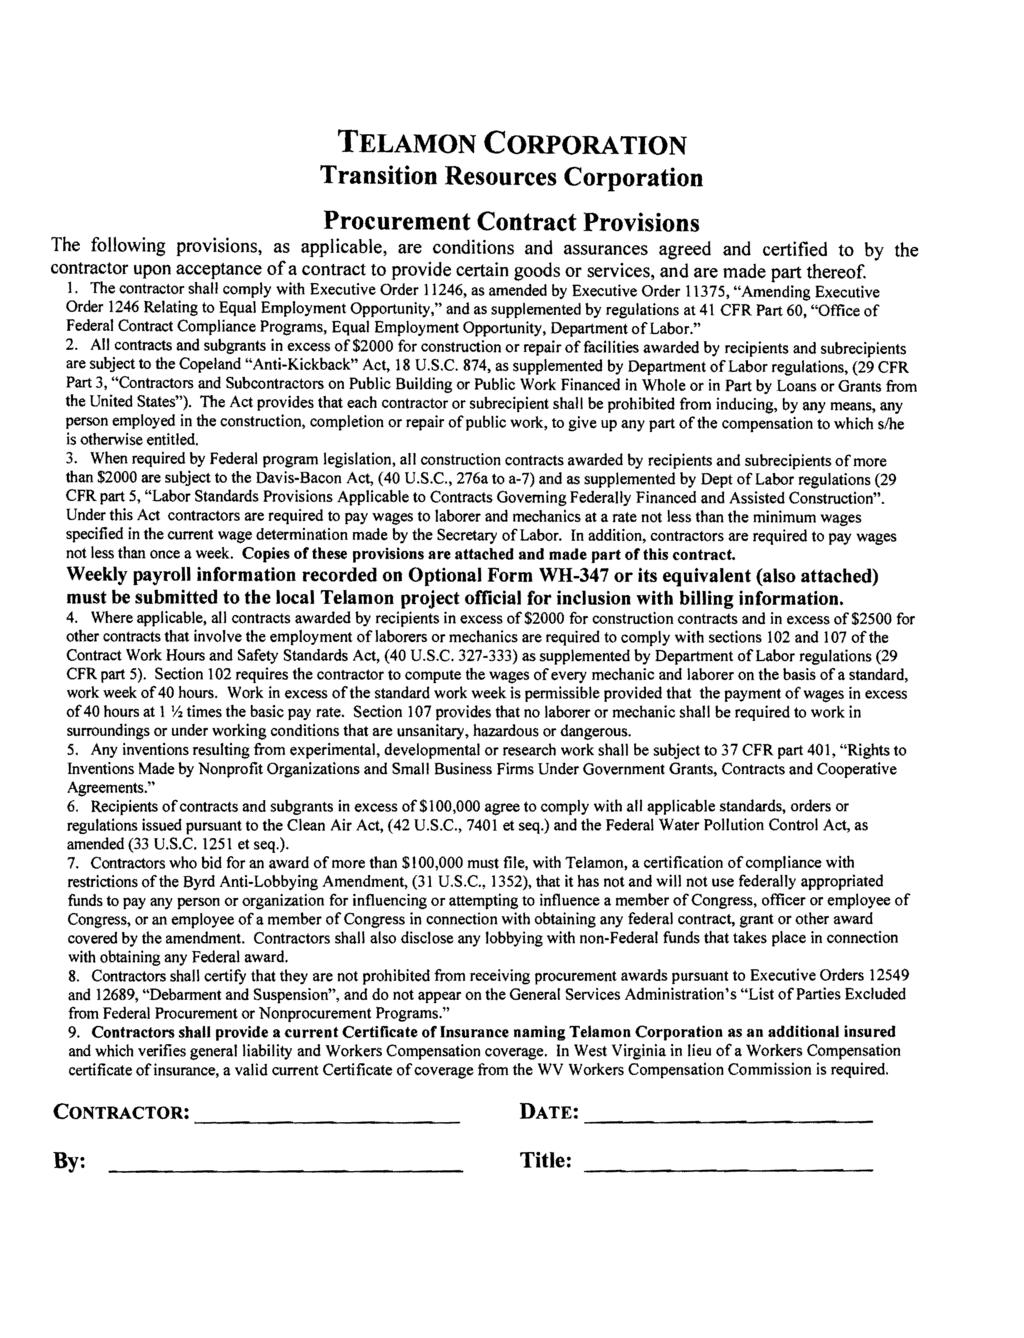 TELAMON CORPORATION Transition Resources Corporation Procurement Contract Provisions The following provisions, as applicable, are conditions and assurances agreed and certified to by the contractor